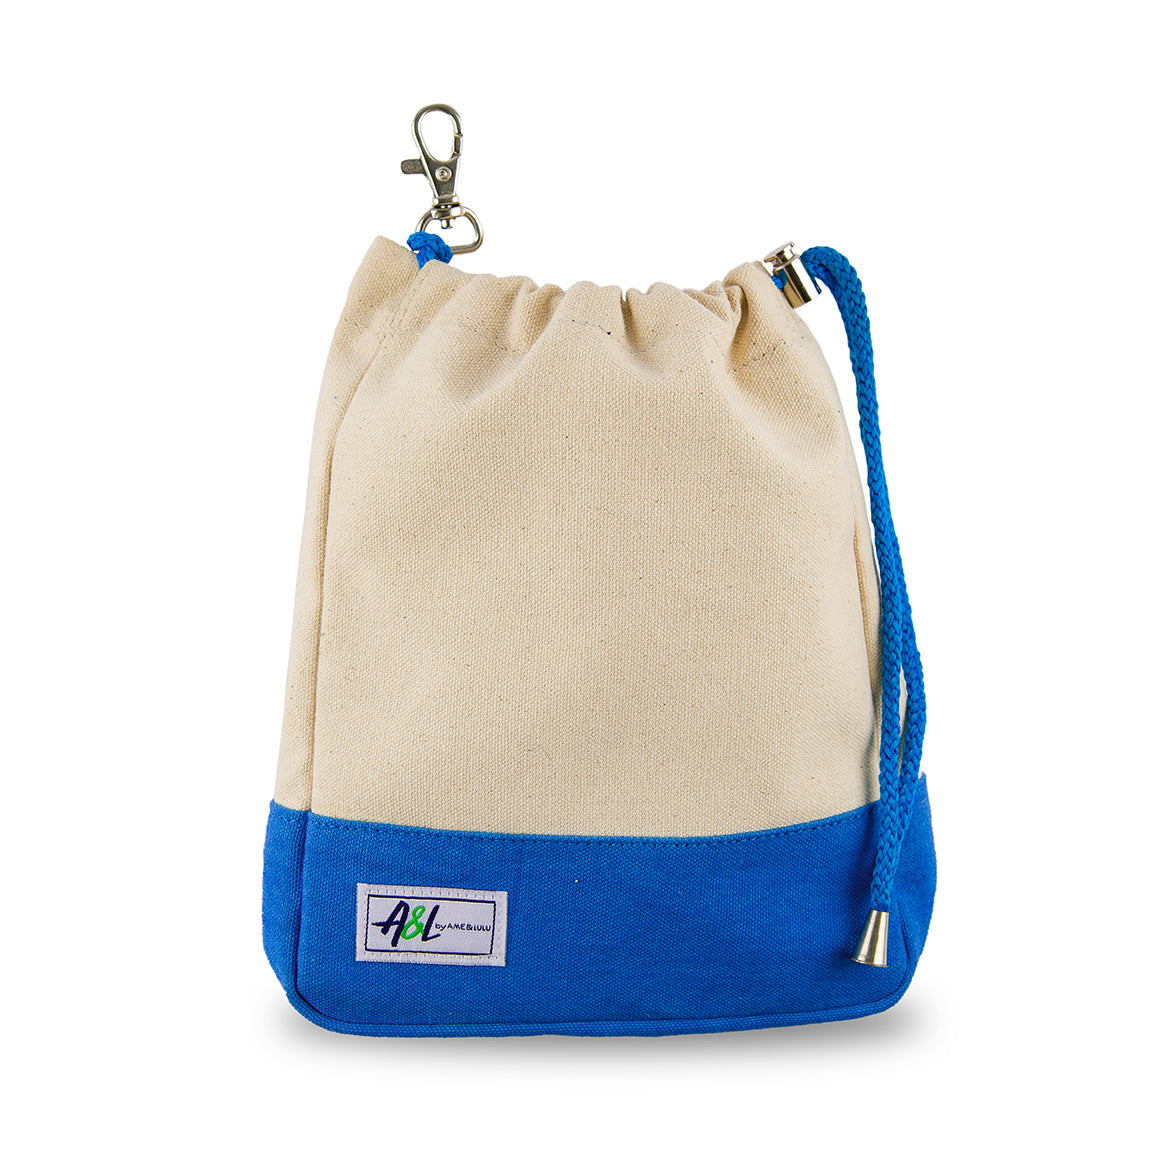 tan canvas small drawstring pouch with blue trim.